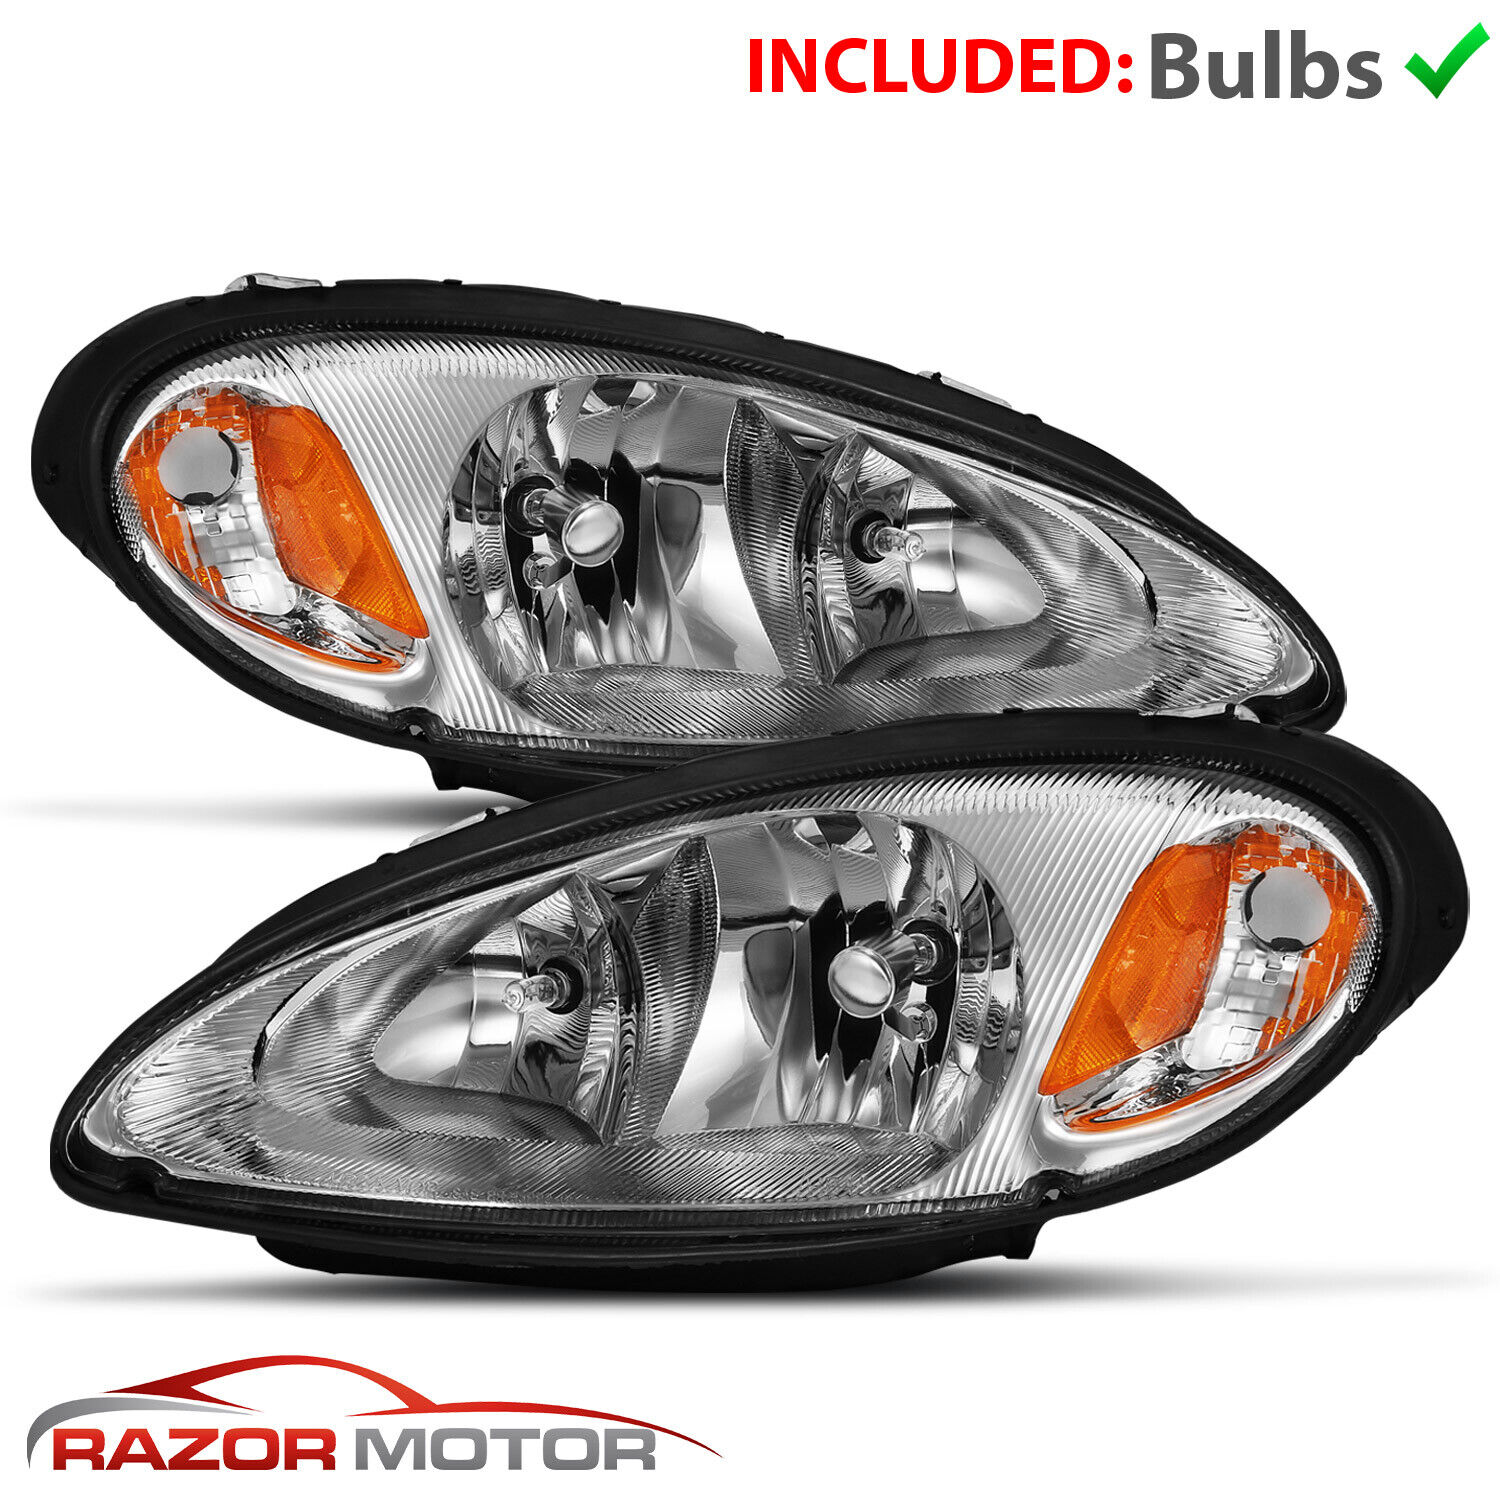 01-05 For Chrysler PT Cruiser Factory Style Replacement Headlights Assembly Pair